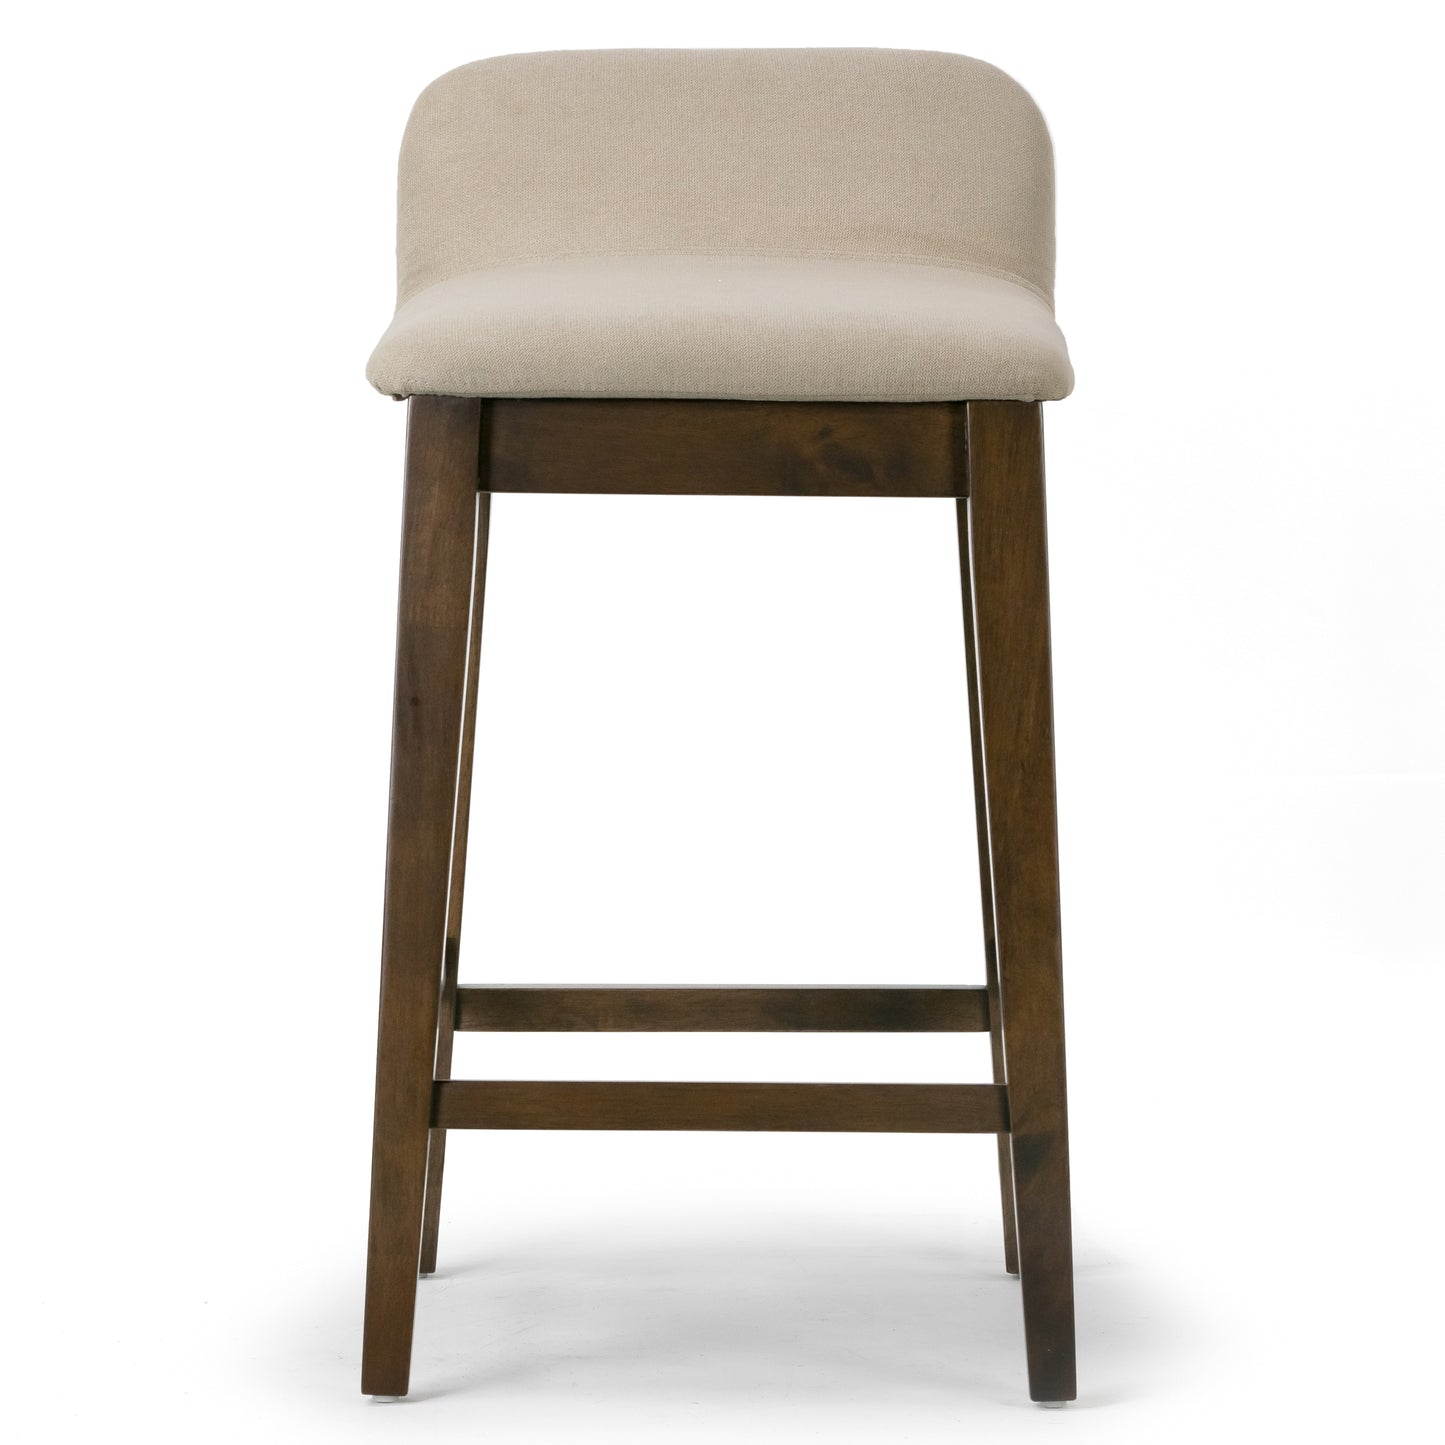 Set of 2 Atia Dark Brown Rubberwood Counter Stool with Low Back Fabric Seat